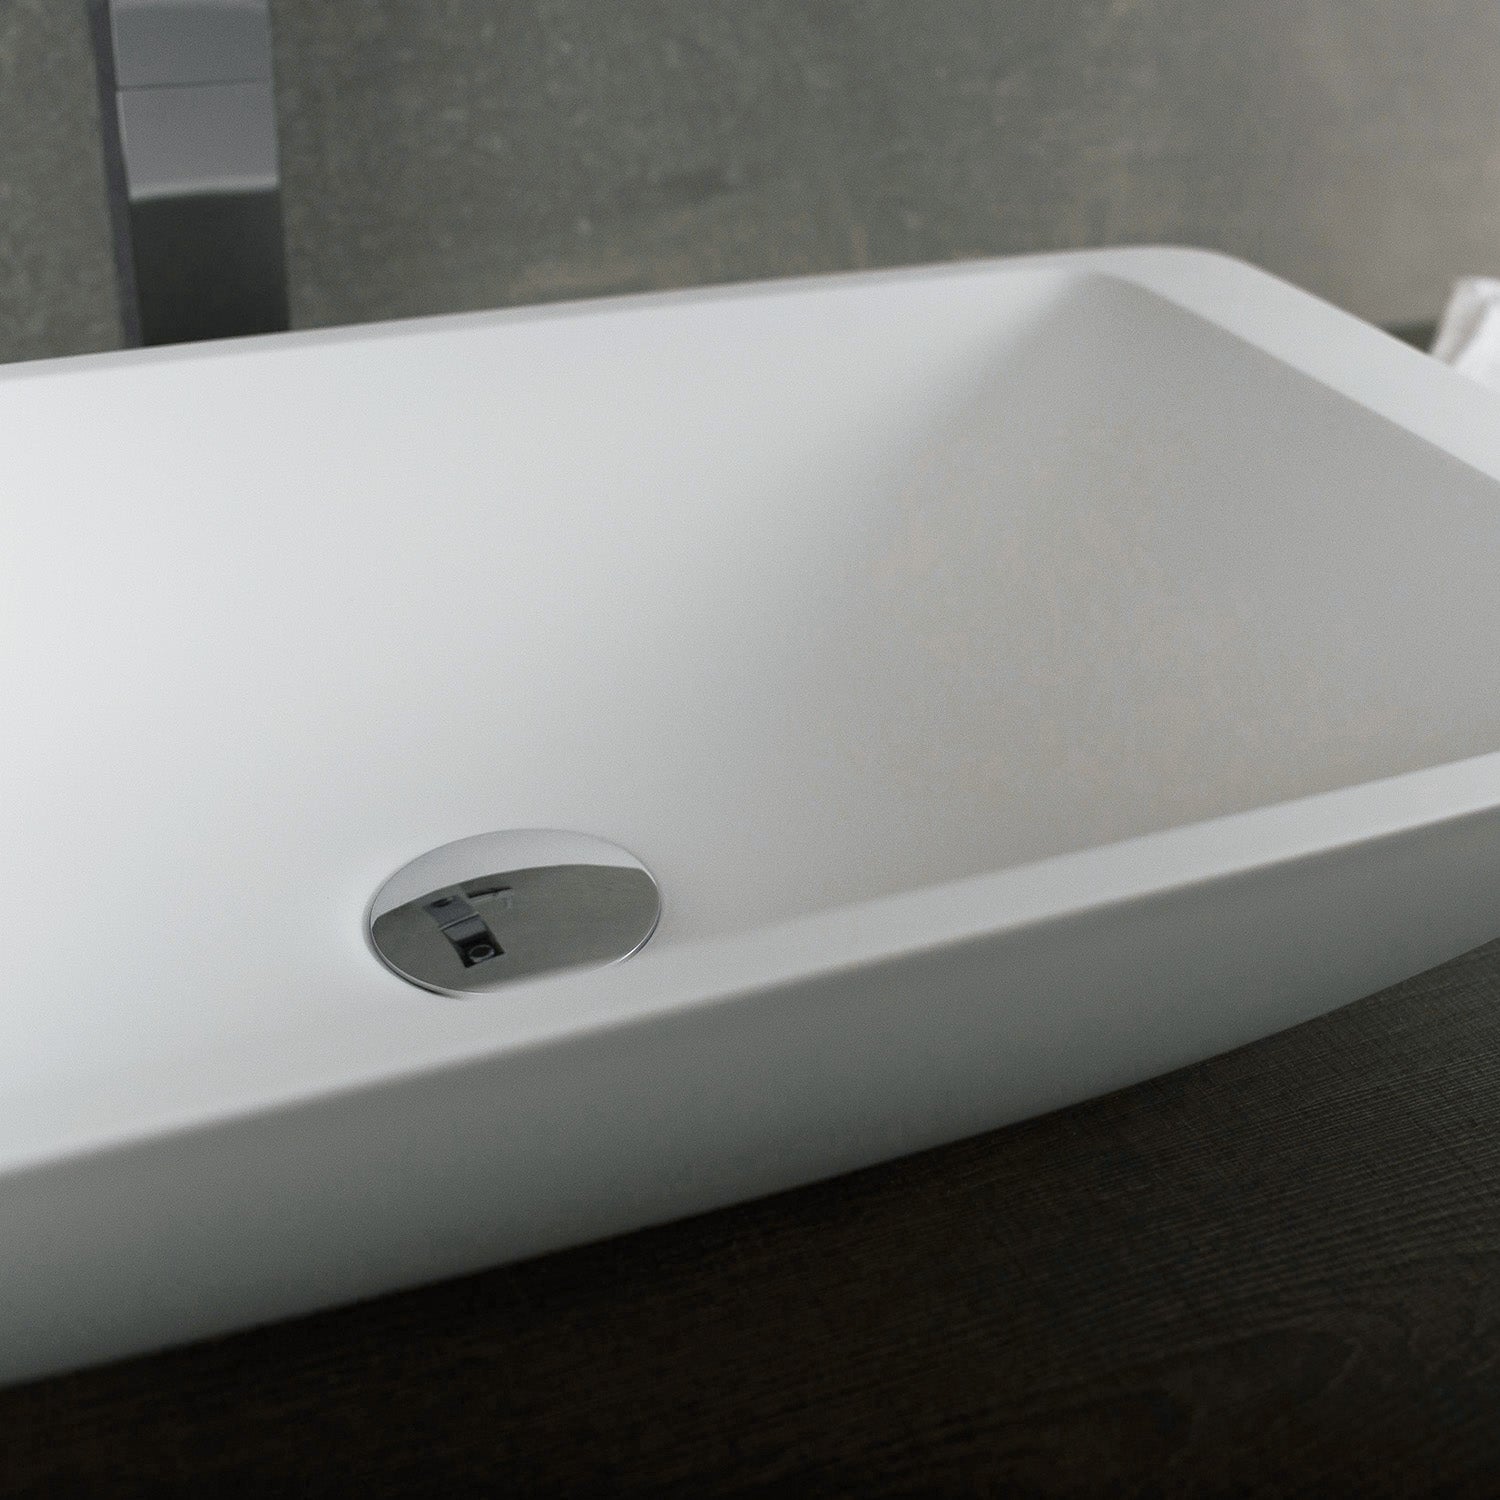 DAX Solid Surface Rectangle Single Bowl Bathroom Vessel Sink, White Matte Finish, 22-7/8 x 13-3/8 x 4 Inches (DAX-AB-1321)